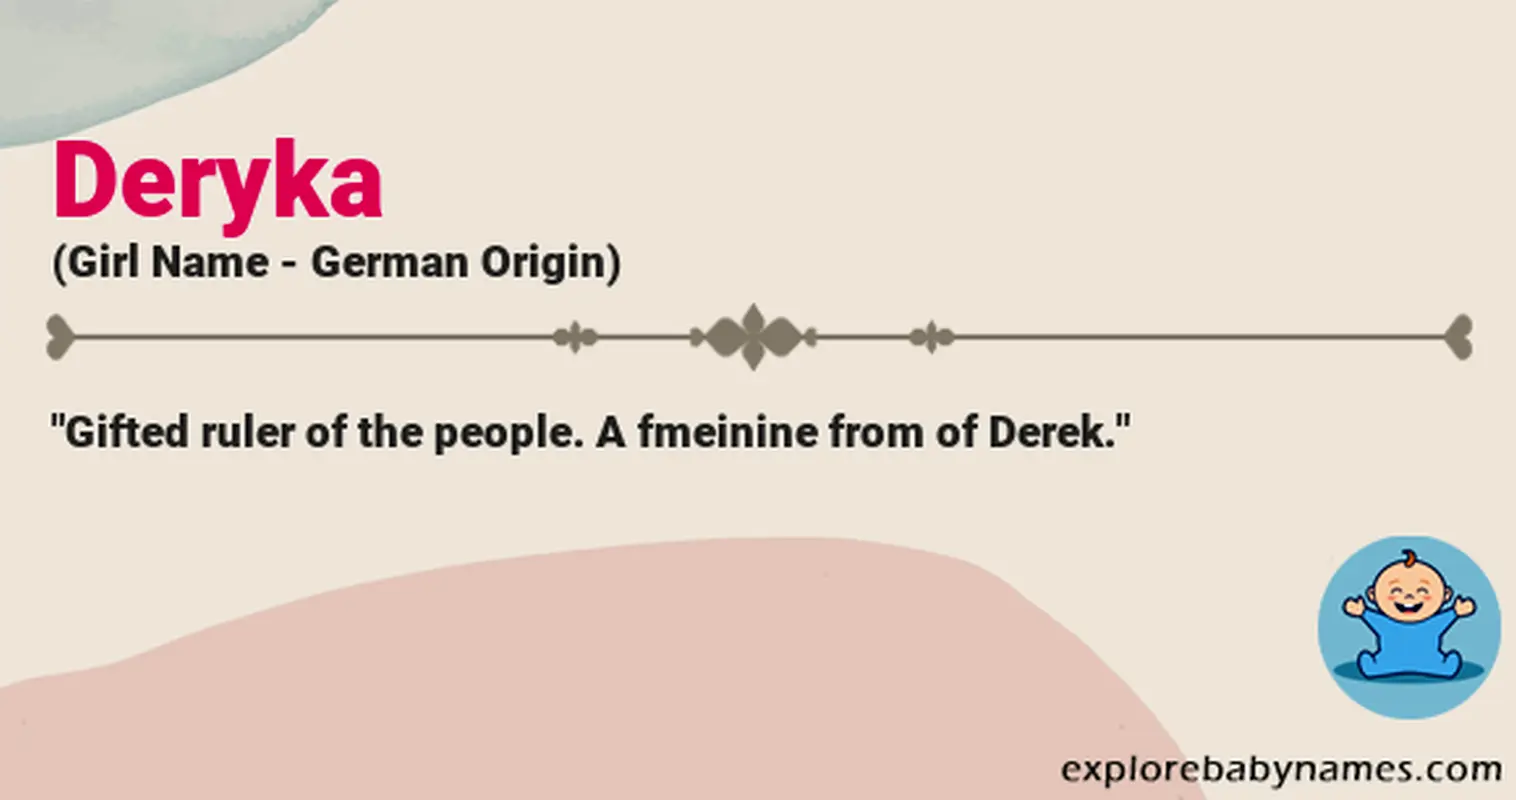 Meaning of Deryka